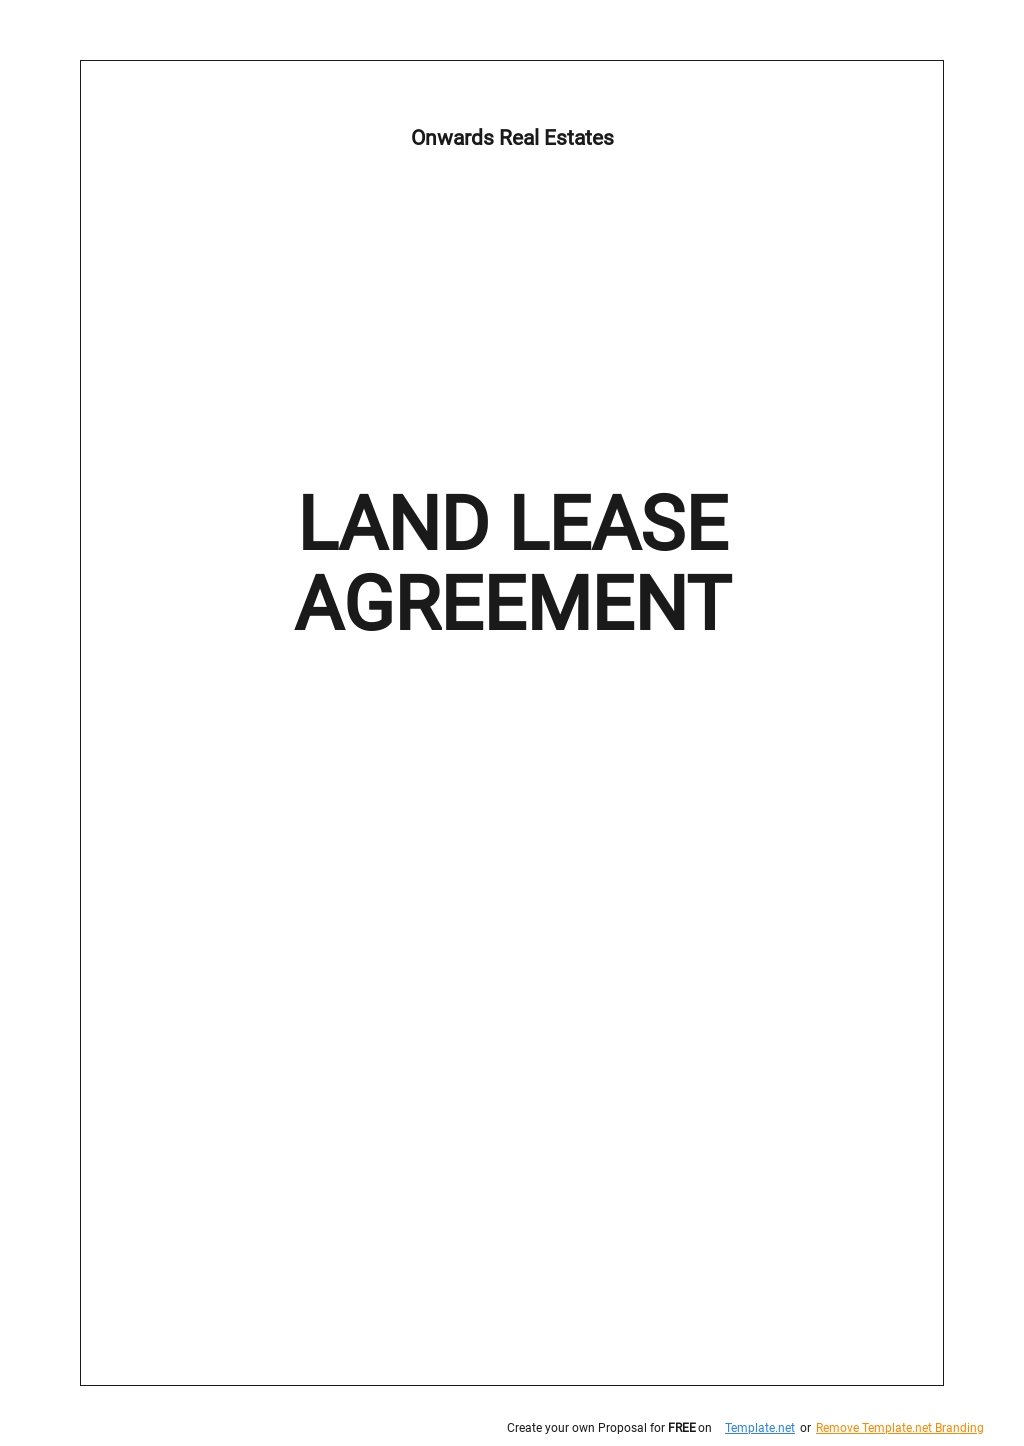 Land Lease Agreements in Word Templates, Designs, Docs, Free